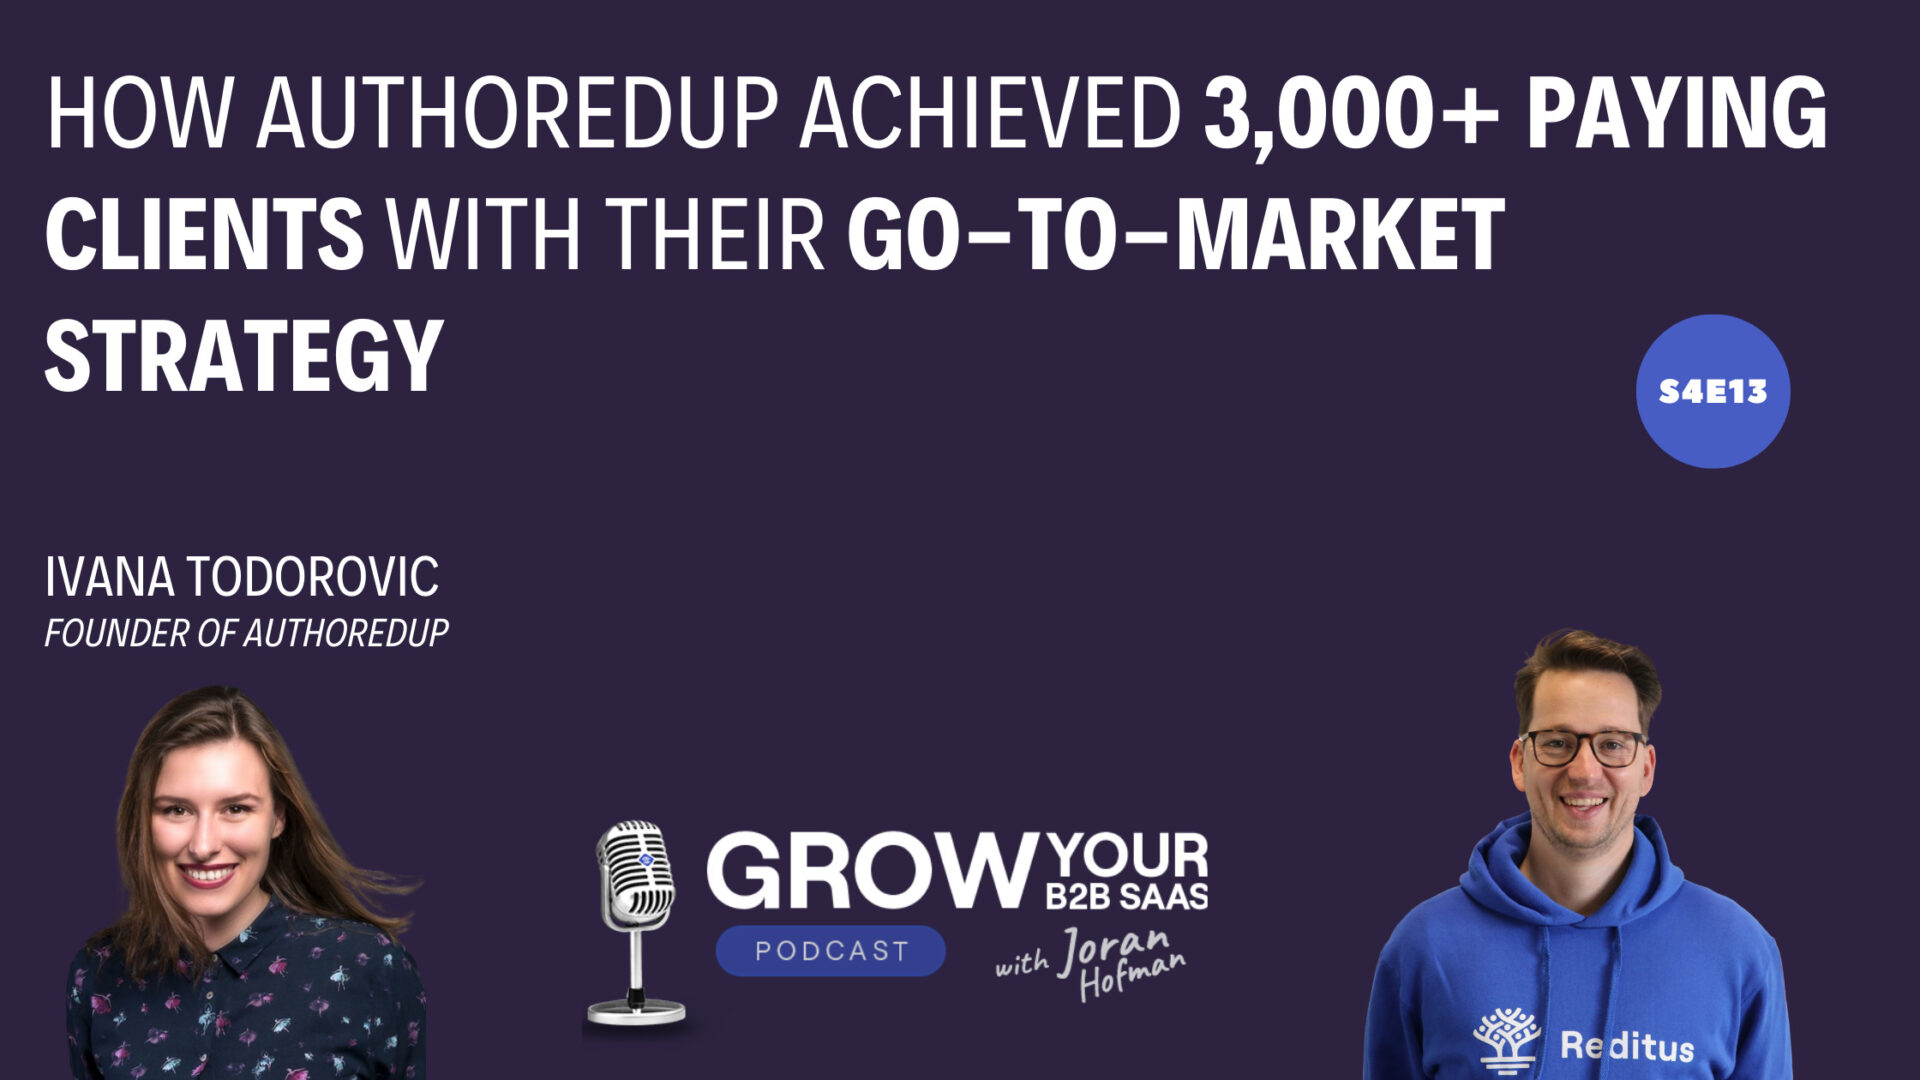 https://www.getreditus.com/podcast/s4e13-how-authoredup-achieved-3000-paying-clients-with-their-go-to-market-strategy-with-ivana-todorovic/